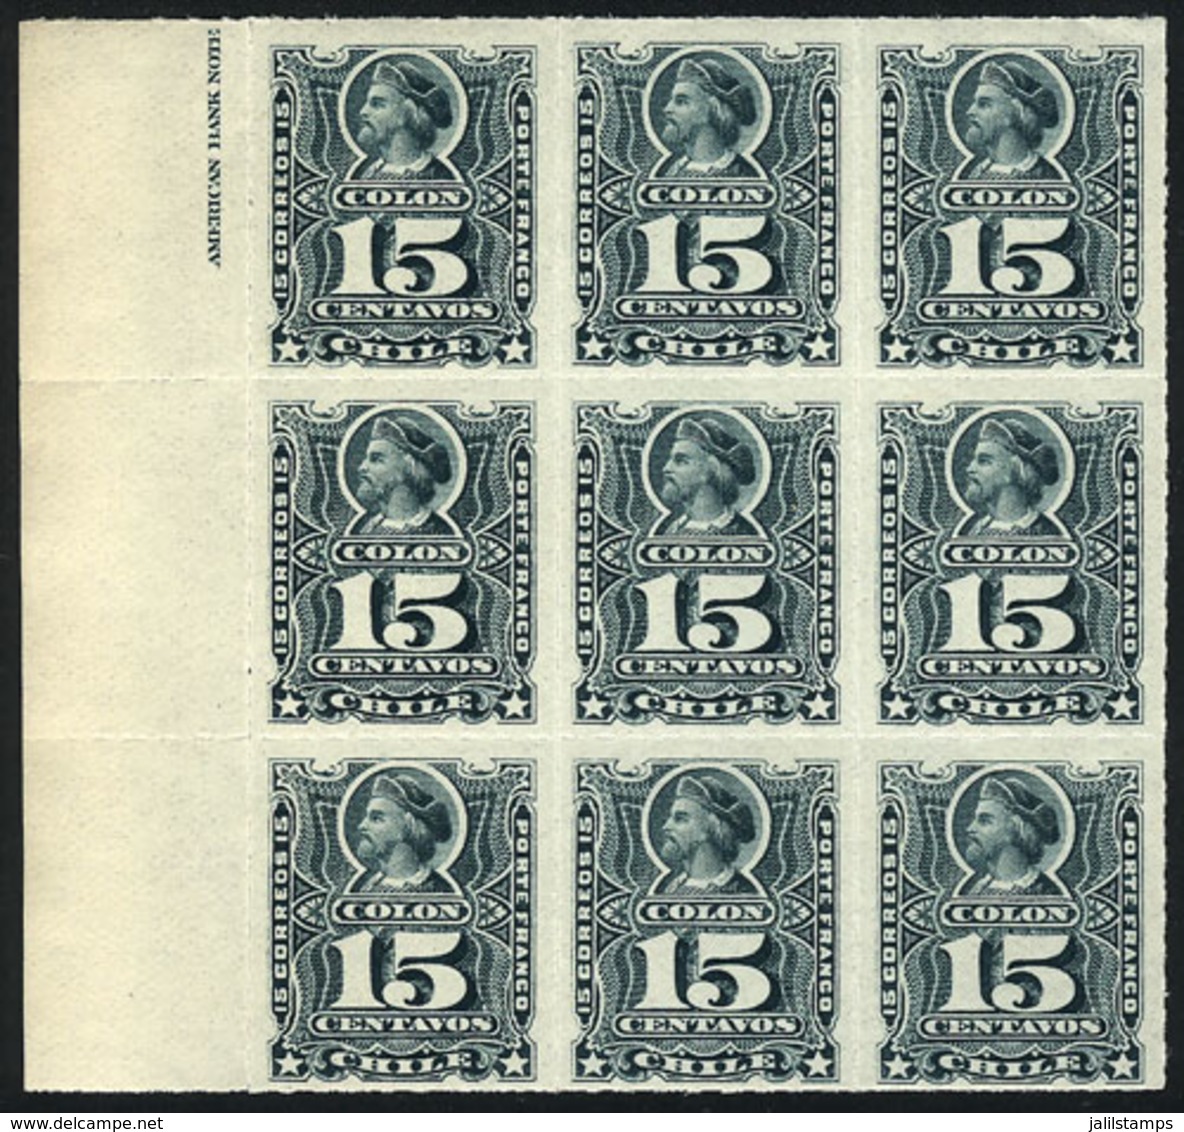 1038 CHILE: Yv.26 (Sc.30), Fantastic Marginal Block Of 9, MNH, As Fresh As The Day It Was Printed, Superb! - Chile